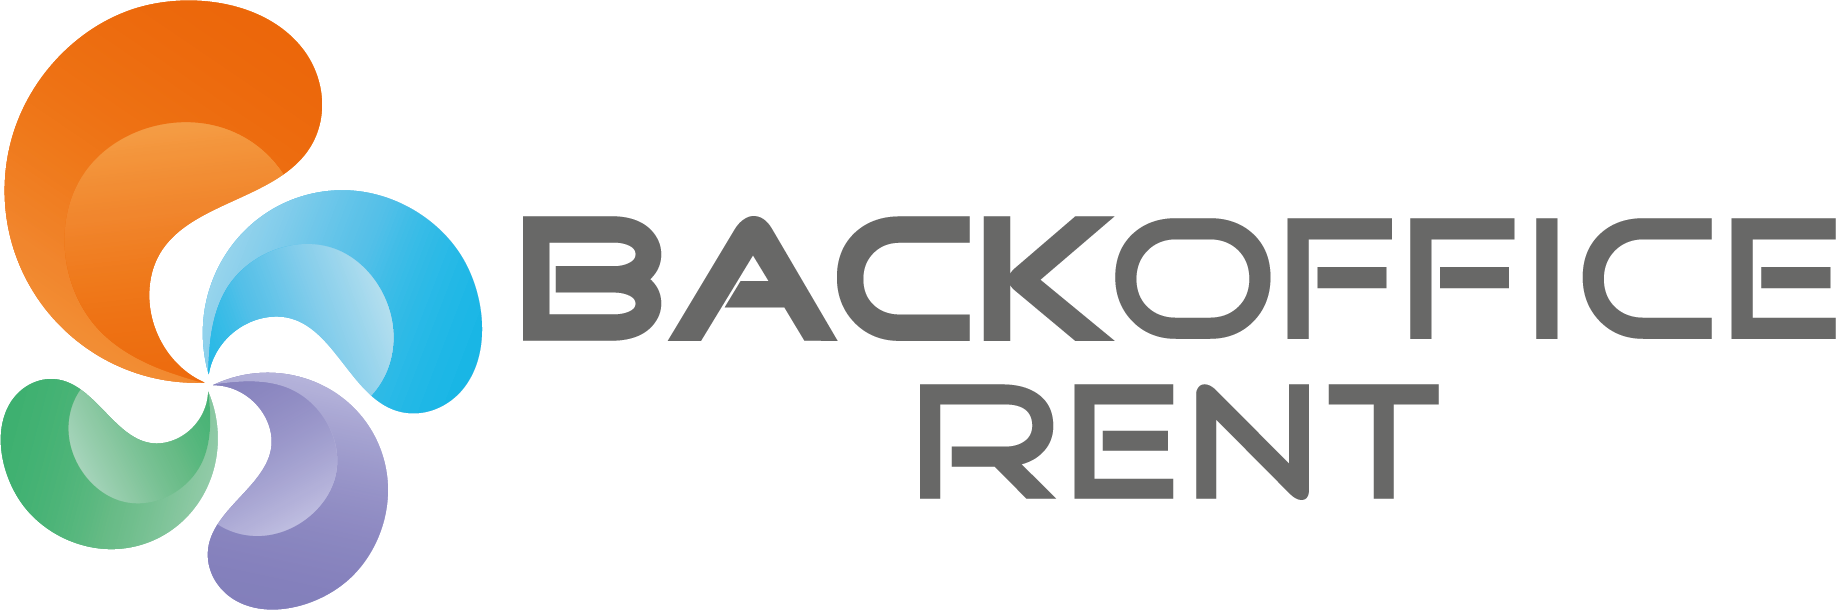 Backoffice Rent